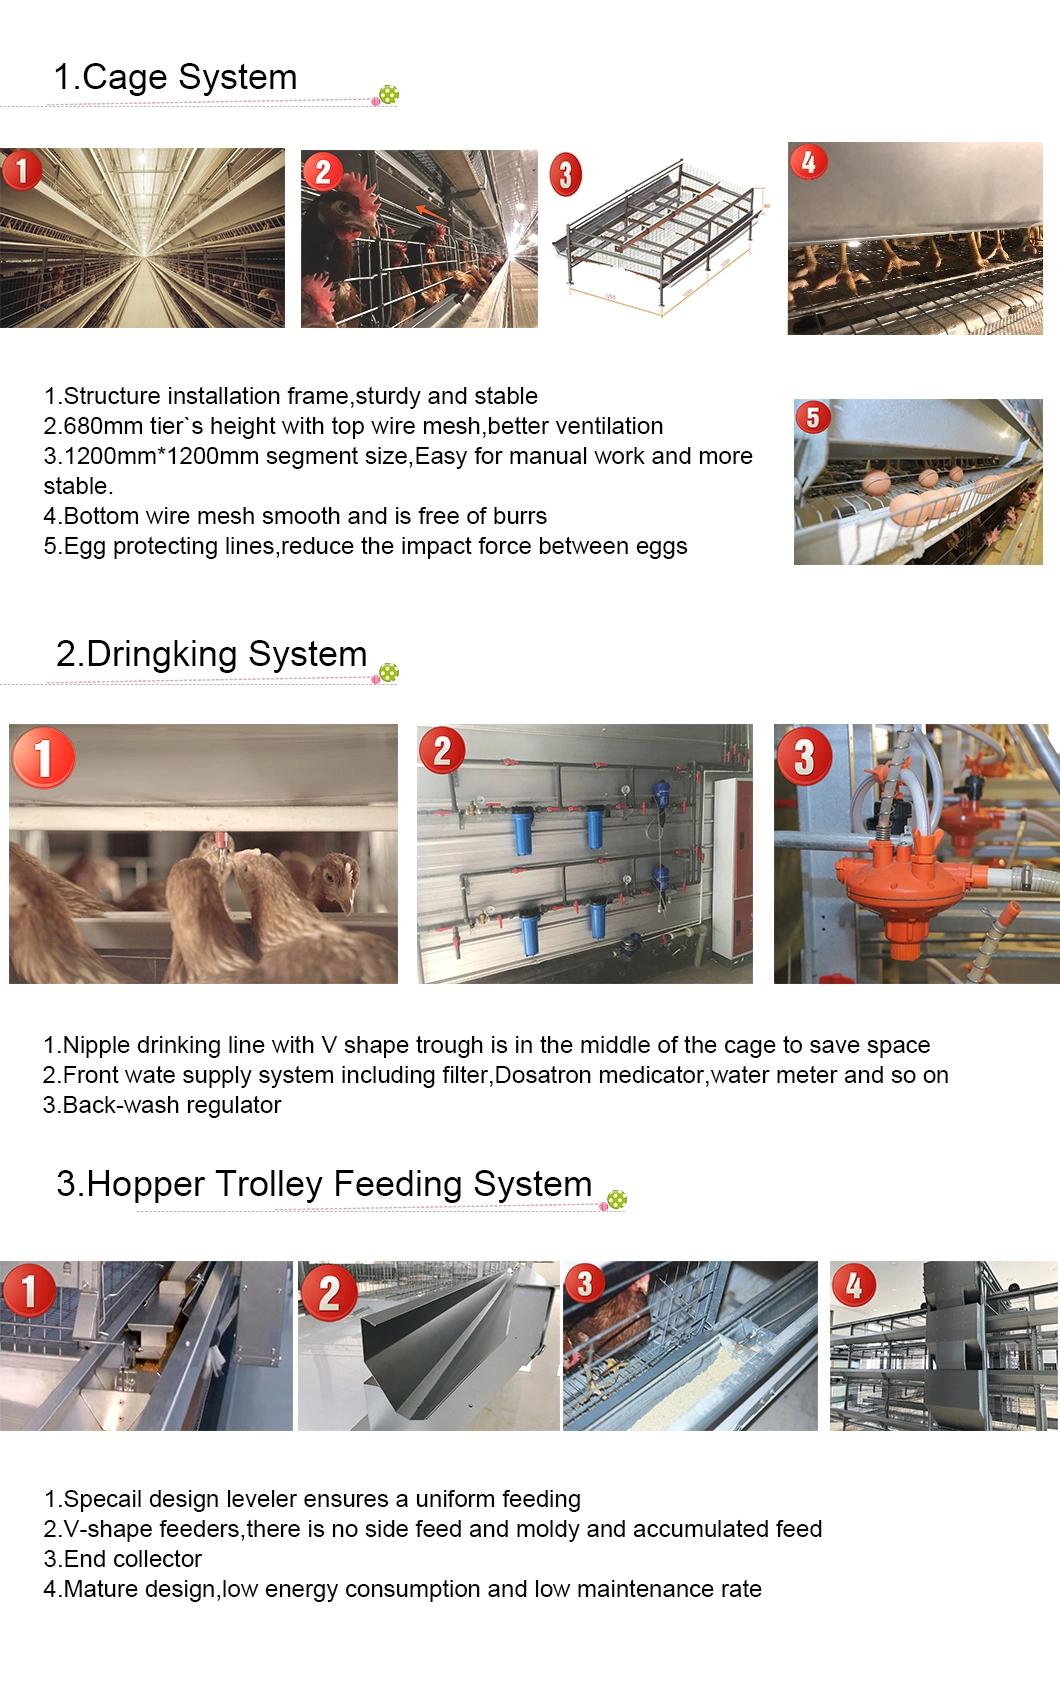 Poultry Drinkers Dosing Medicine and Spray Disinfection Mature Design Egg Factory Equipment